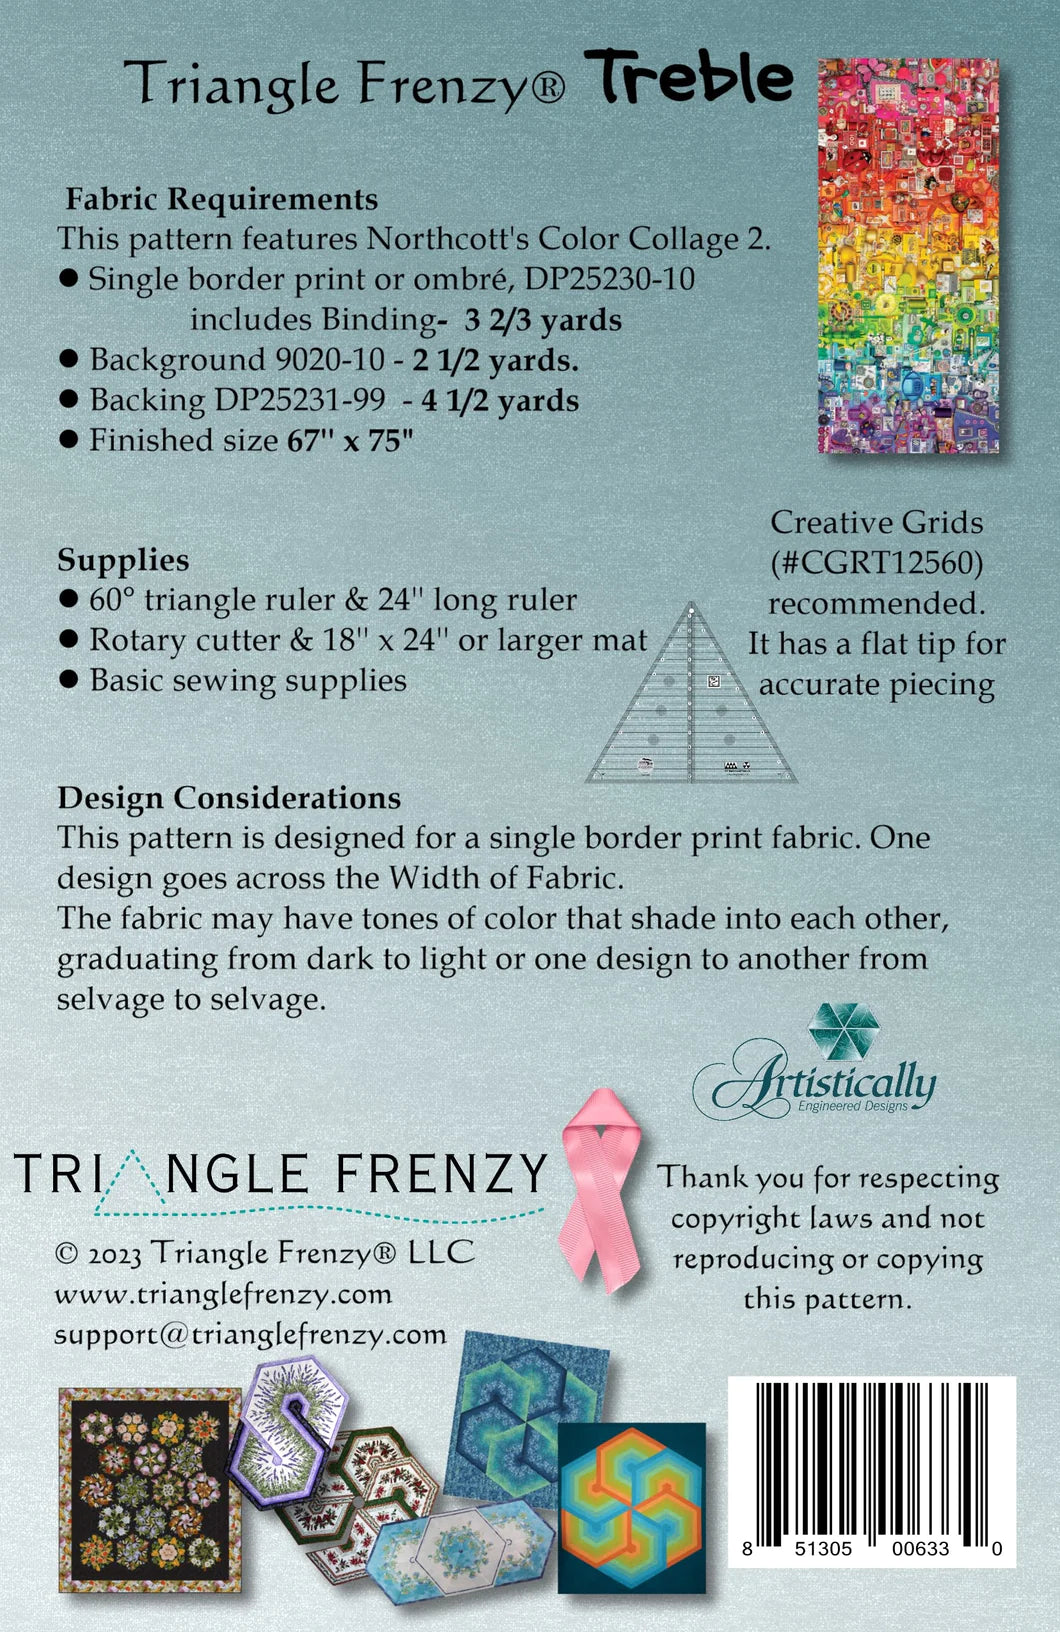 Back of the Treble Quilt Pattern by Triangle Frenzy